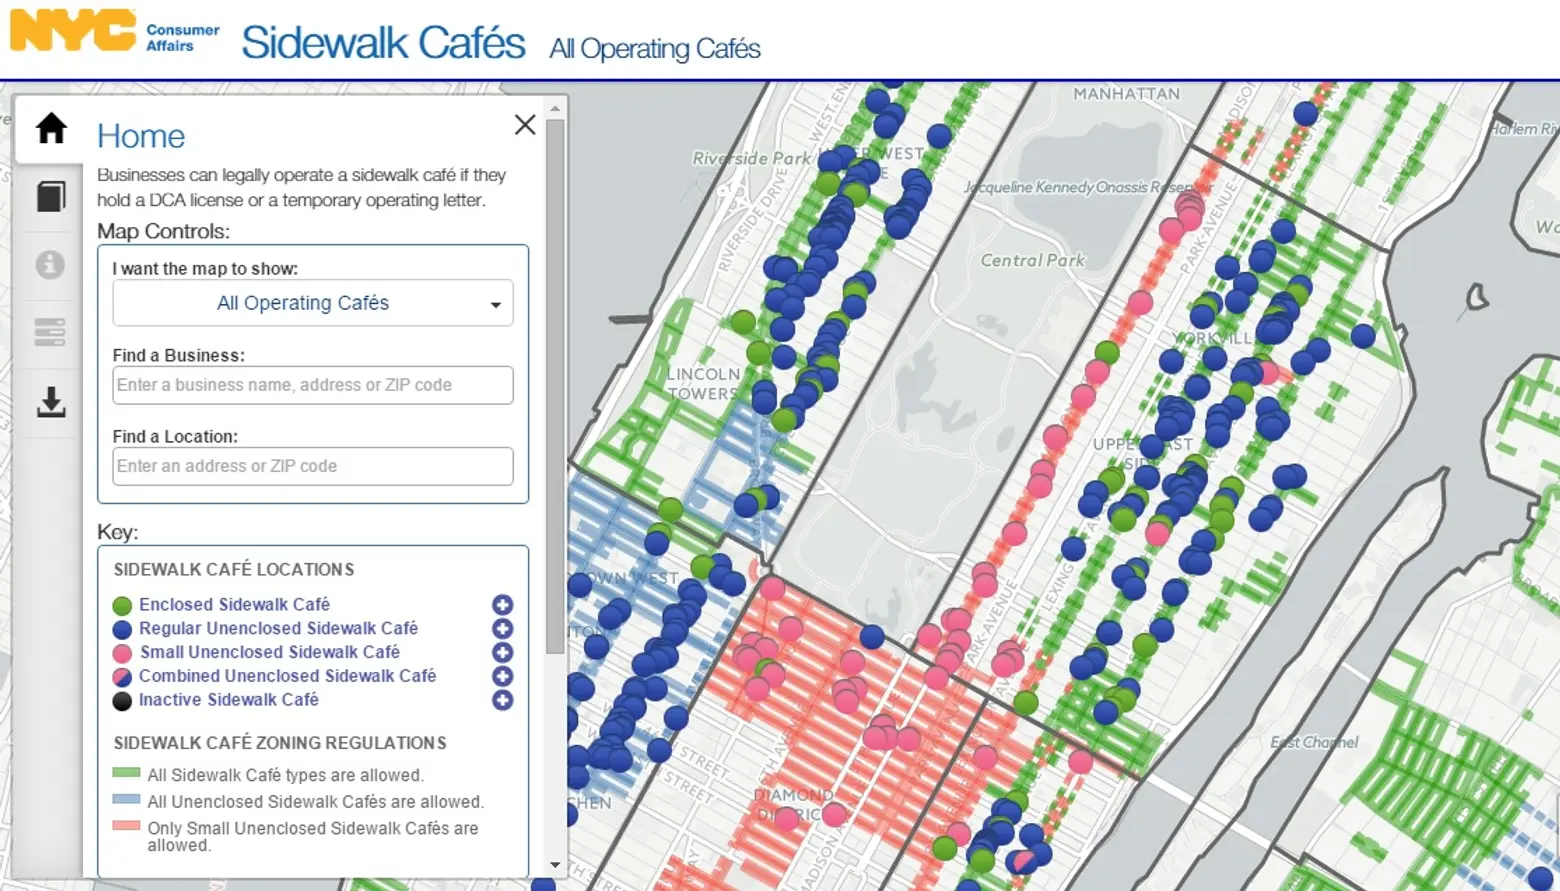 Want to Dine Al Fresco Tonight? This Interactive Map Shows All 1,357 Sidewalk Cafés in NYC